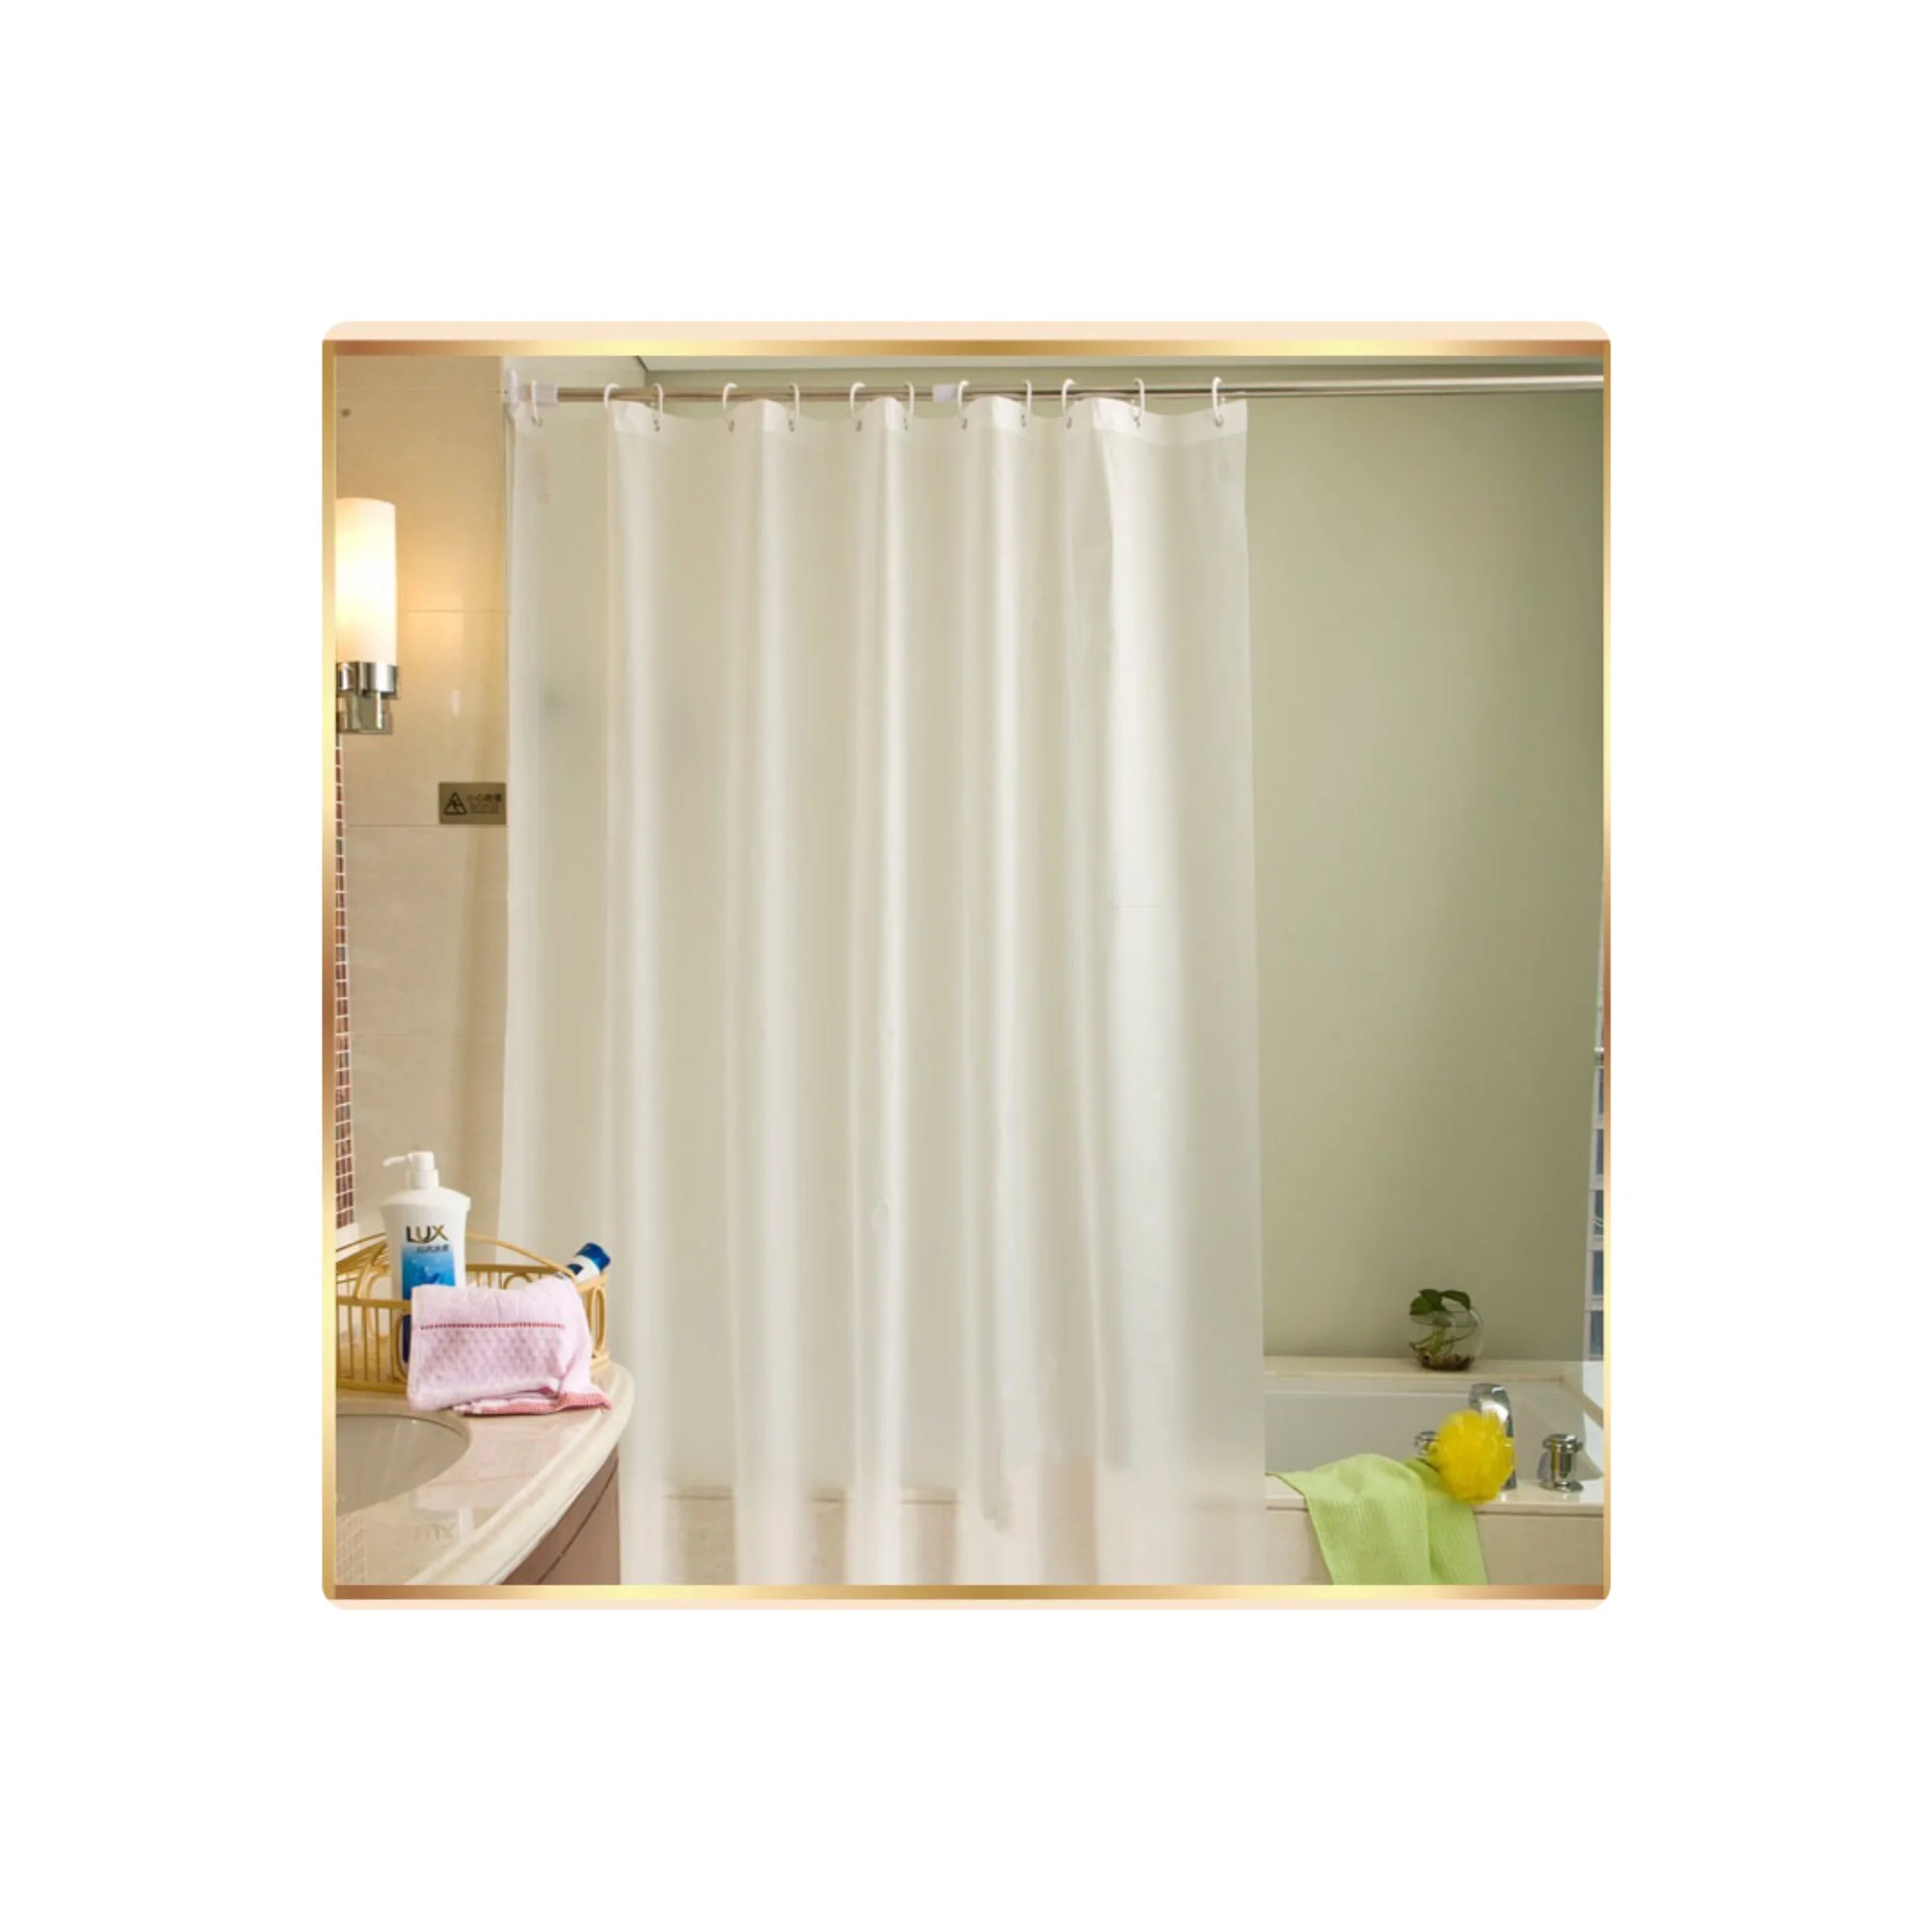 
Peva Waterproof Mildew Shower Curtain High Quality, White Thick Opaque Solid Color Simple Style Shower Curtain/  (62209901282)